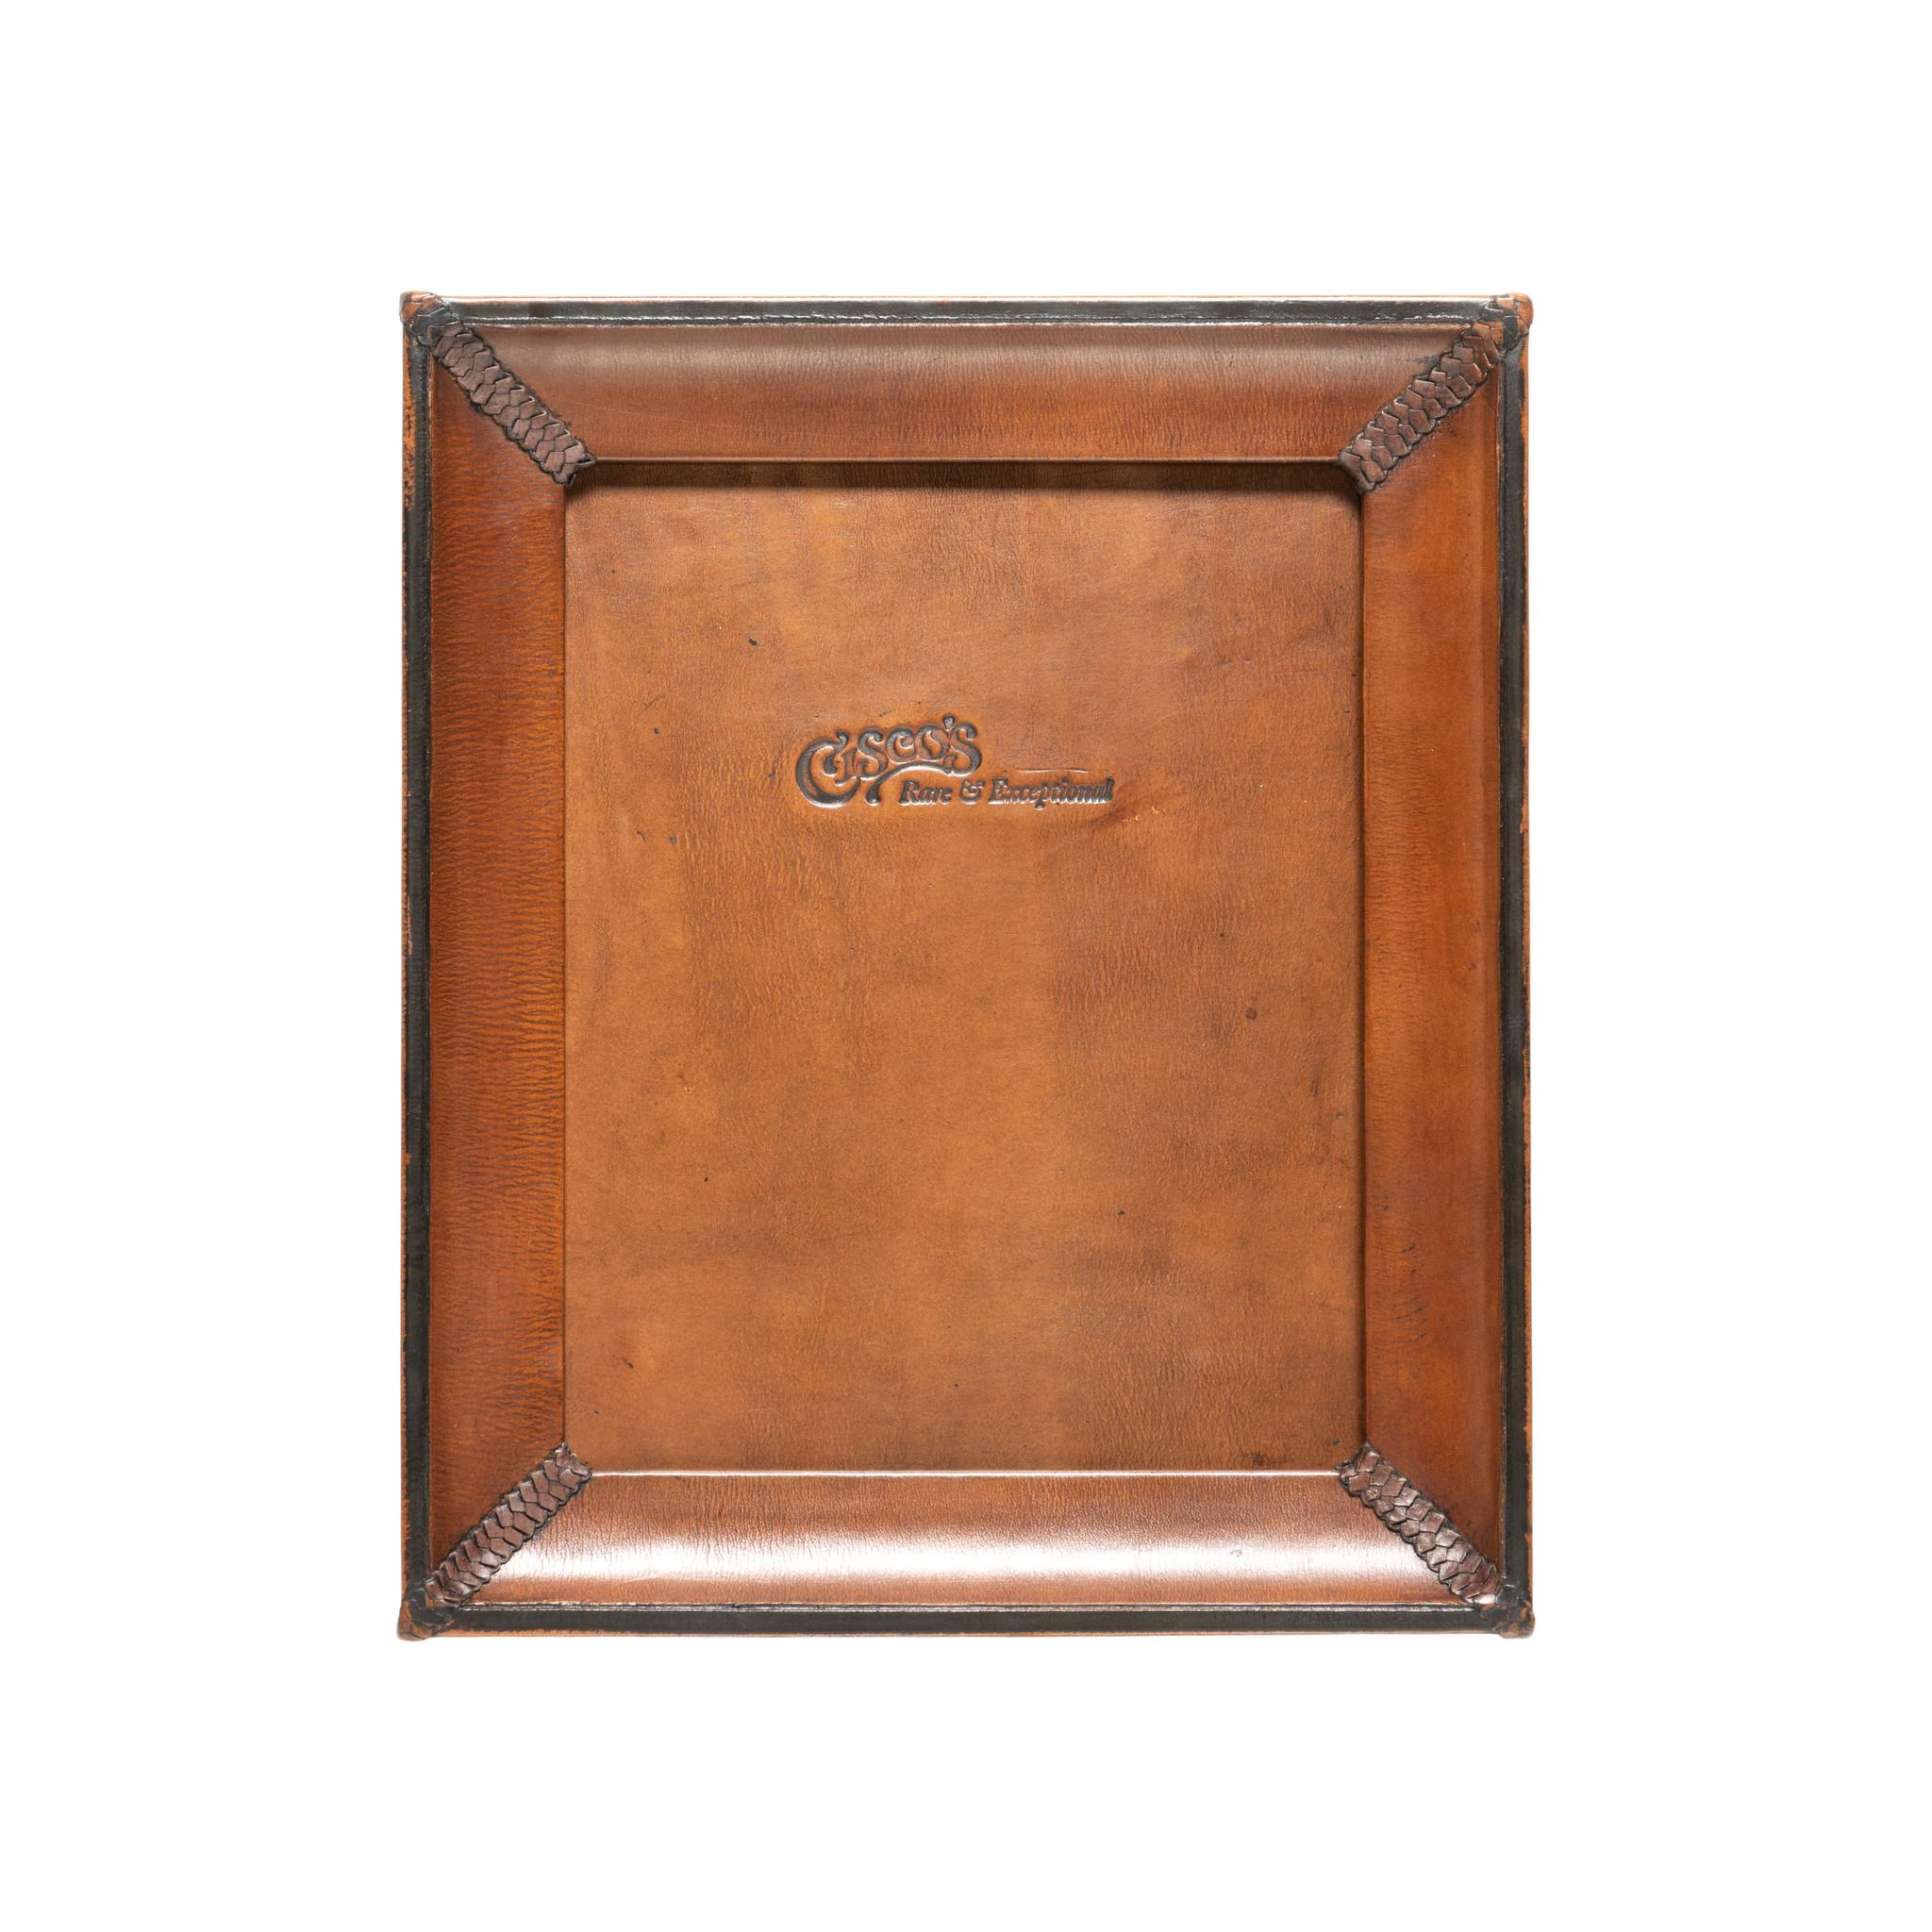 4x6 Medium Brown and Black Leather Tabletop Picture Frame - The Artisan In New Condition For Sale In Coeur d'Alene, ID